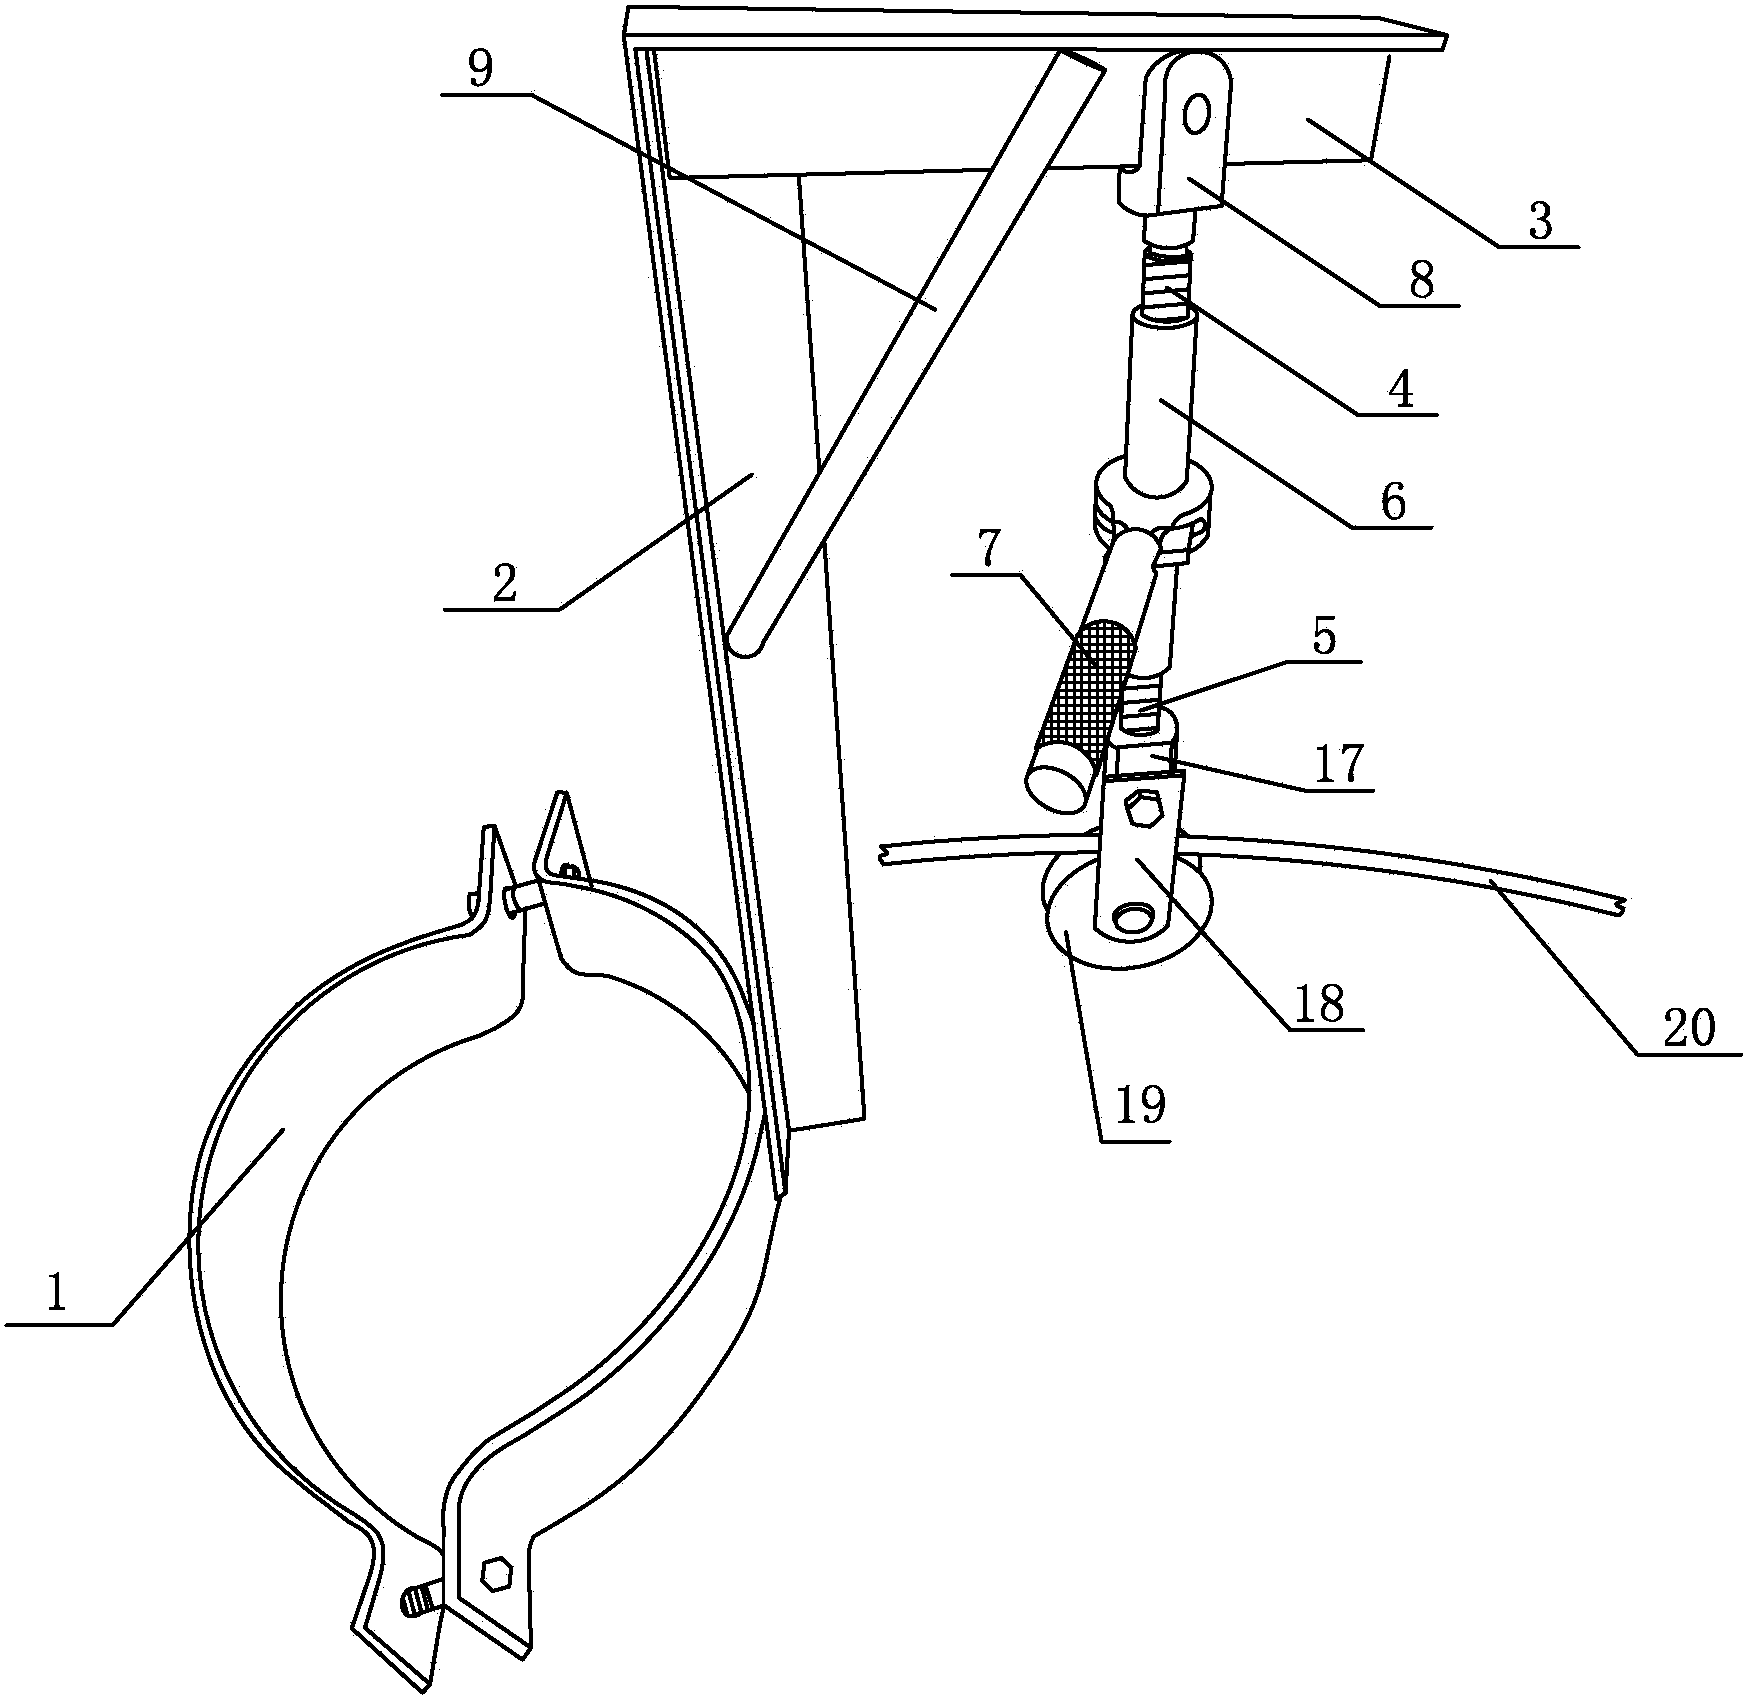 Lifting device for lifting overhead ground wire on straight concrete pole